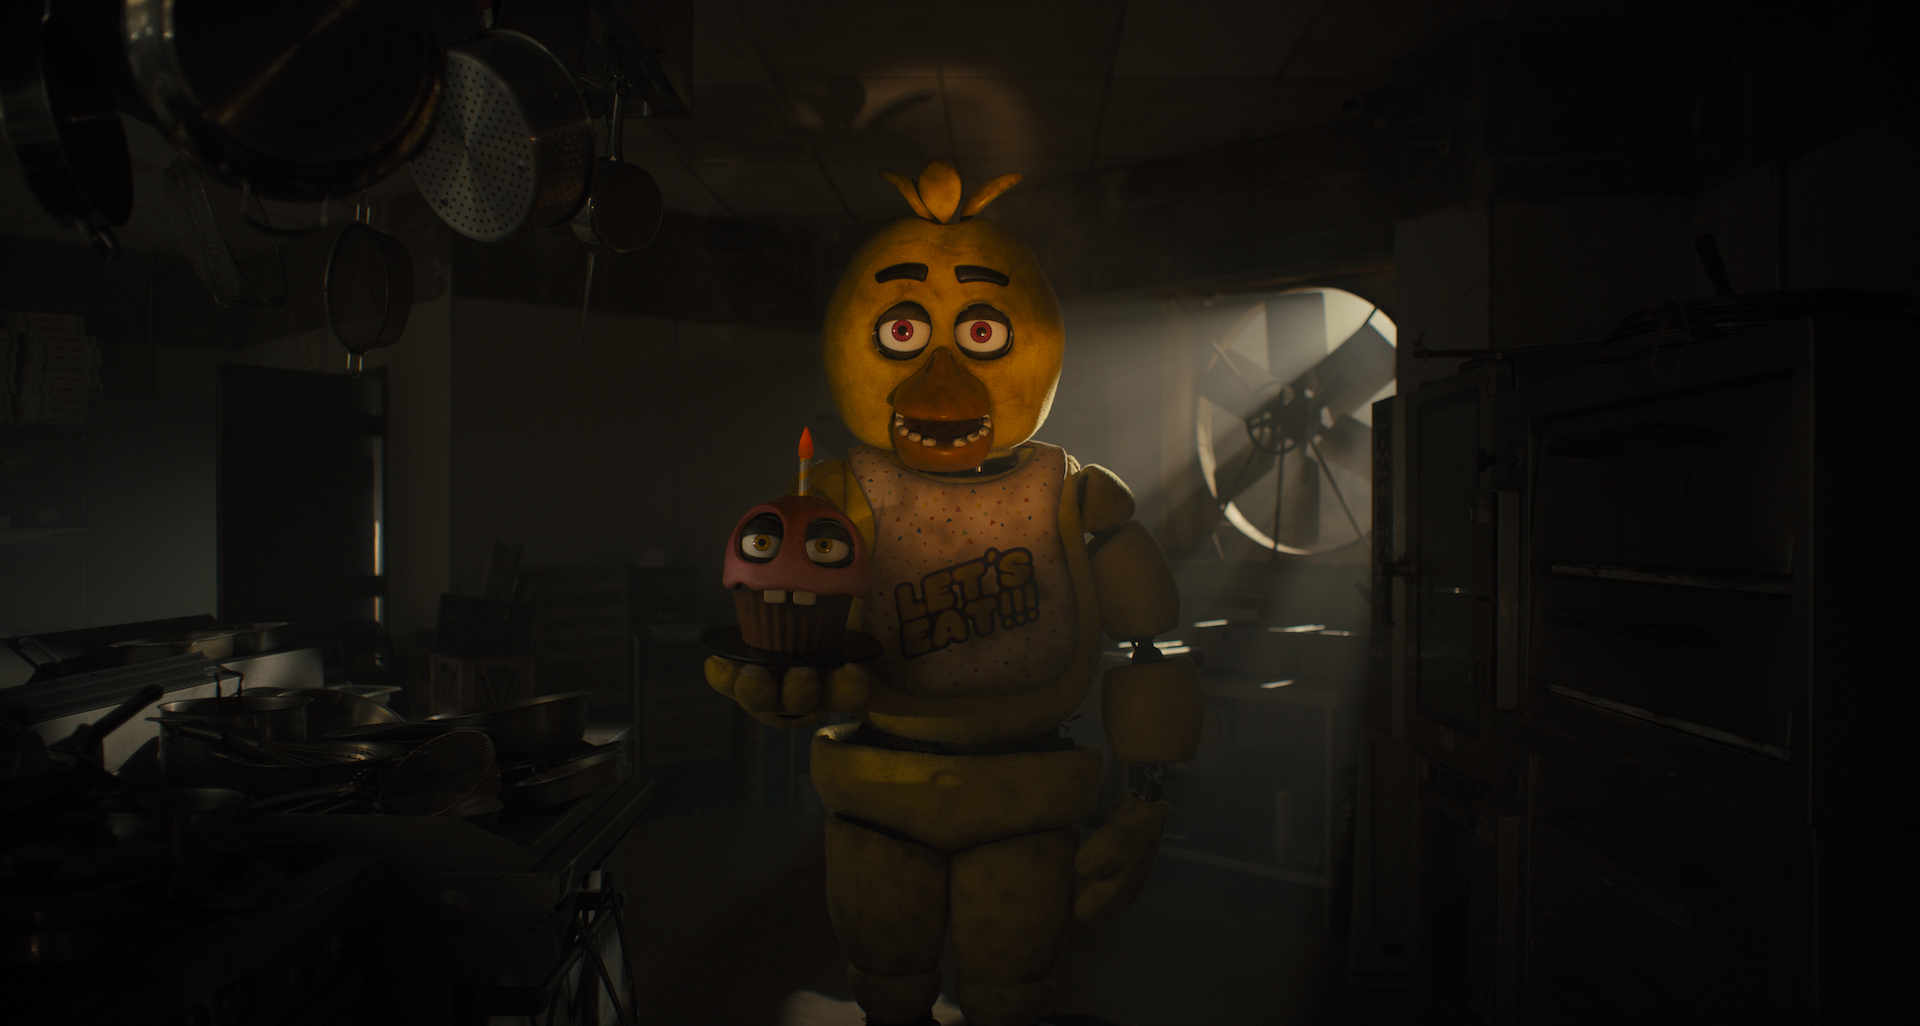 (from left) Cupcake and Chica in Five Nights at Freddy's, directed by Emma Tammi.